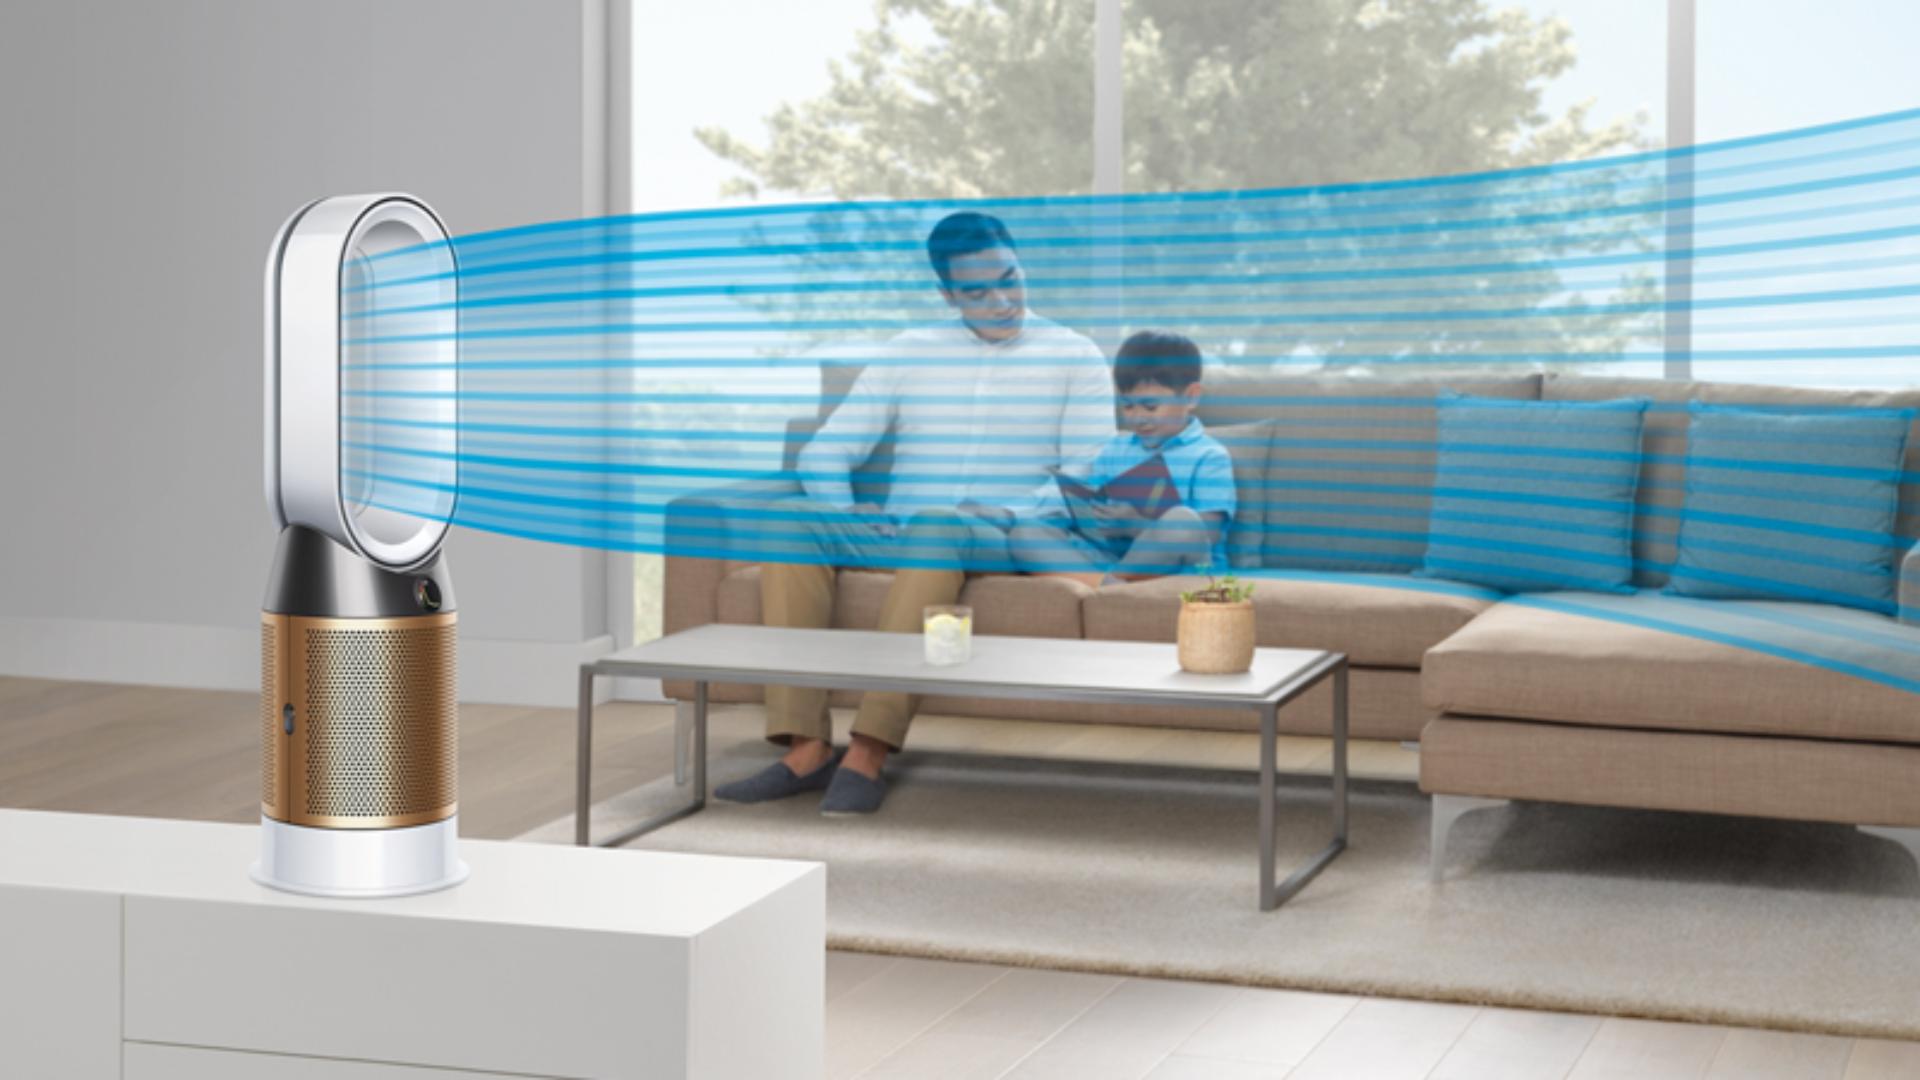 A family relax in a stream of purified air in Fan mode.